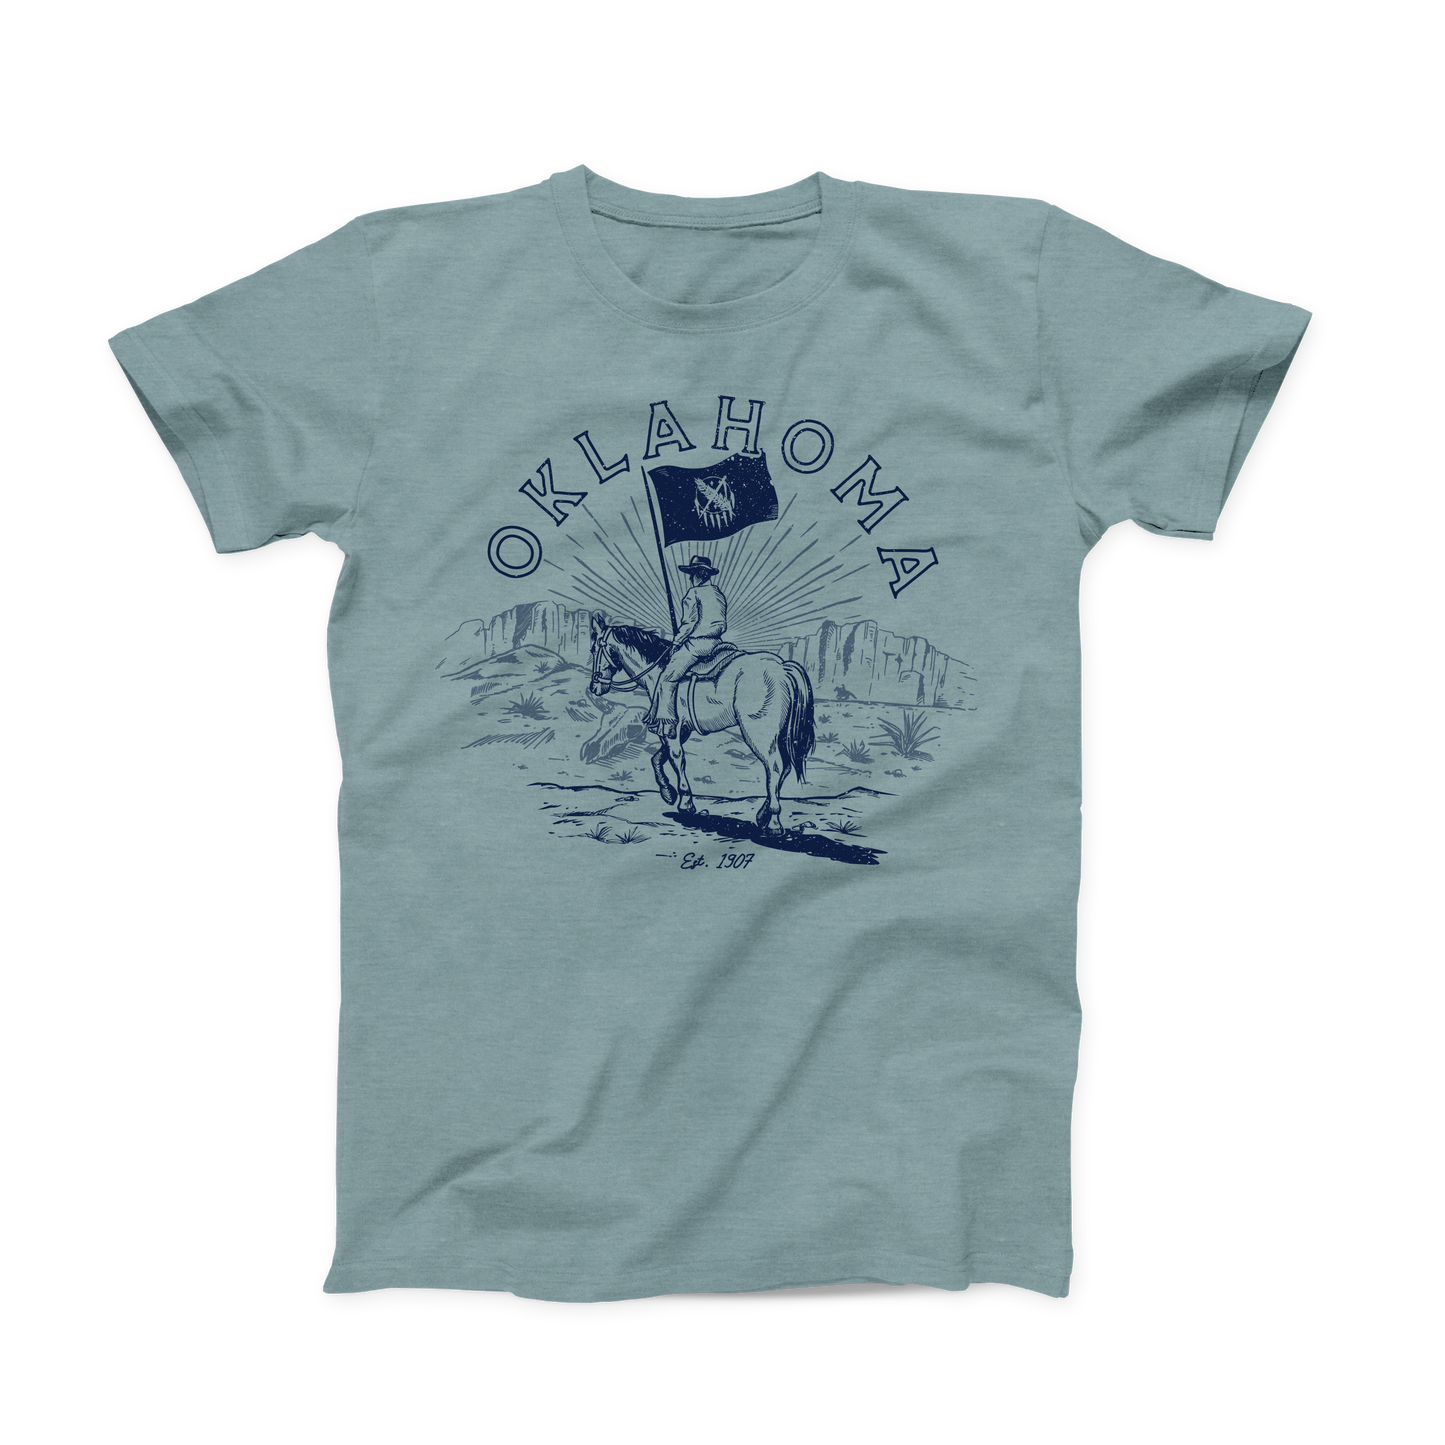 Heather Dusty Blue colored Oklahoma T-shirt. Screen printed in Navy is a Cowboy on horseback, traveling through a canyon with the Oklahoma State Flag. "Oklahoma" is written in a half circle above the design. And below the design in small font is "Est. 1907"